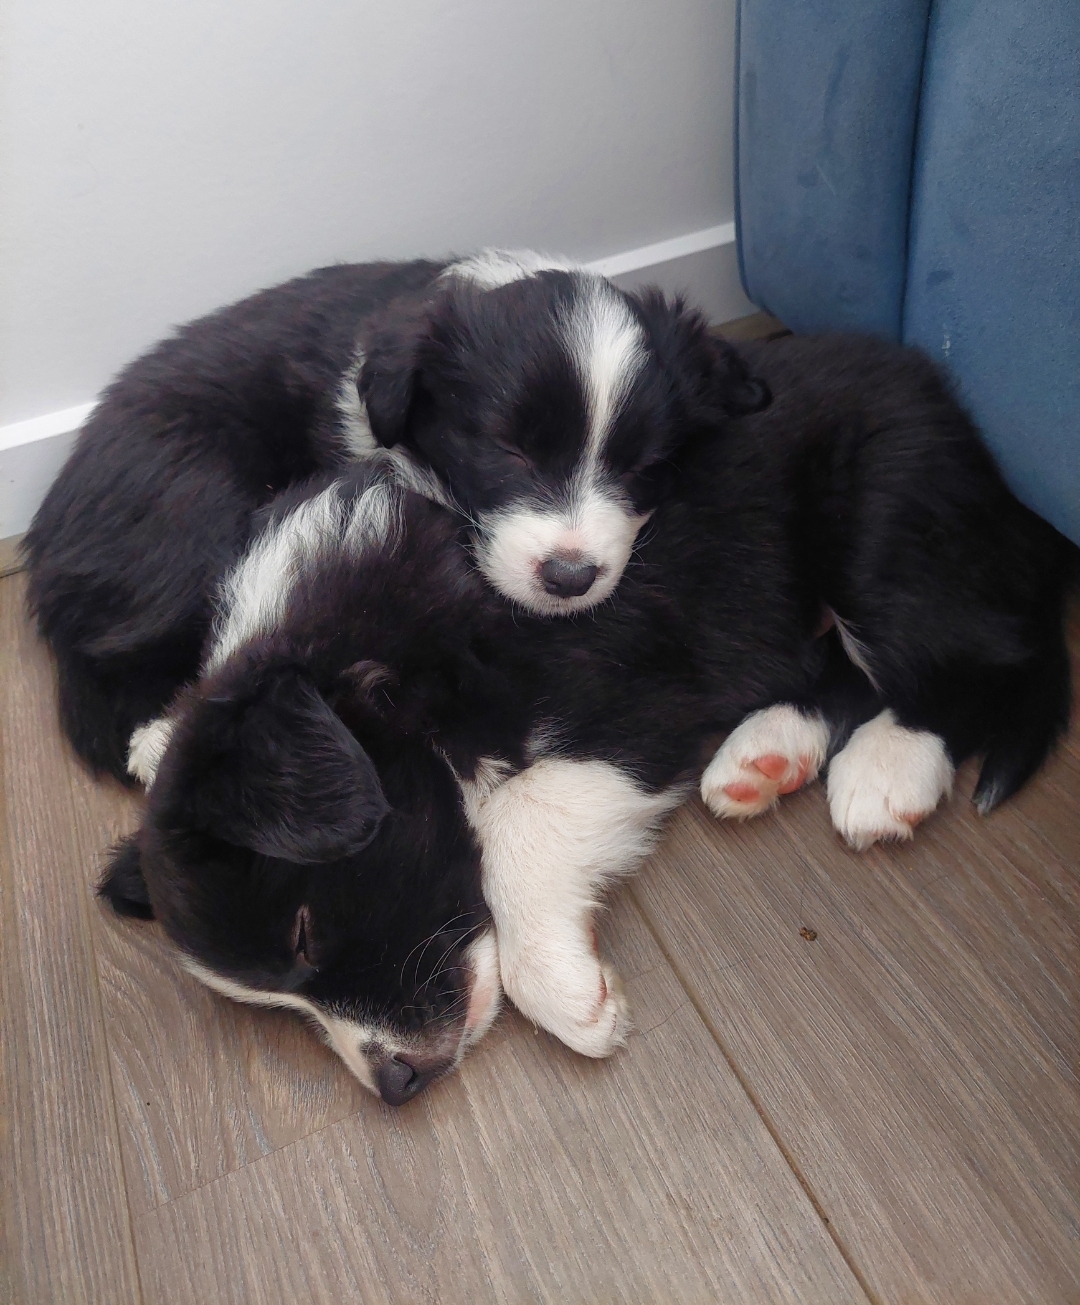 BORDER COLLIE PUPS - Avalible now - pure bred x 2 male, long/medium hair